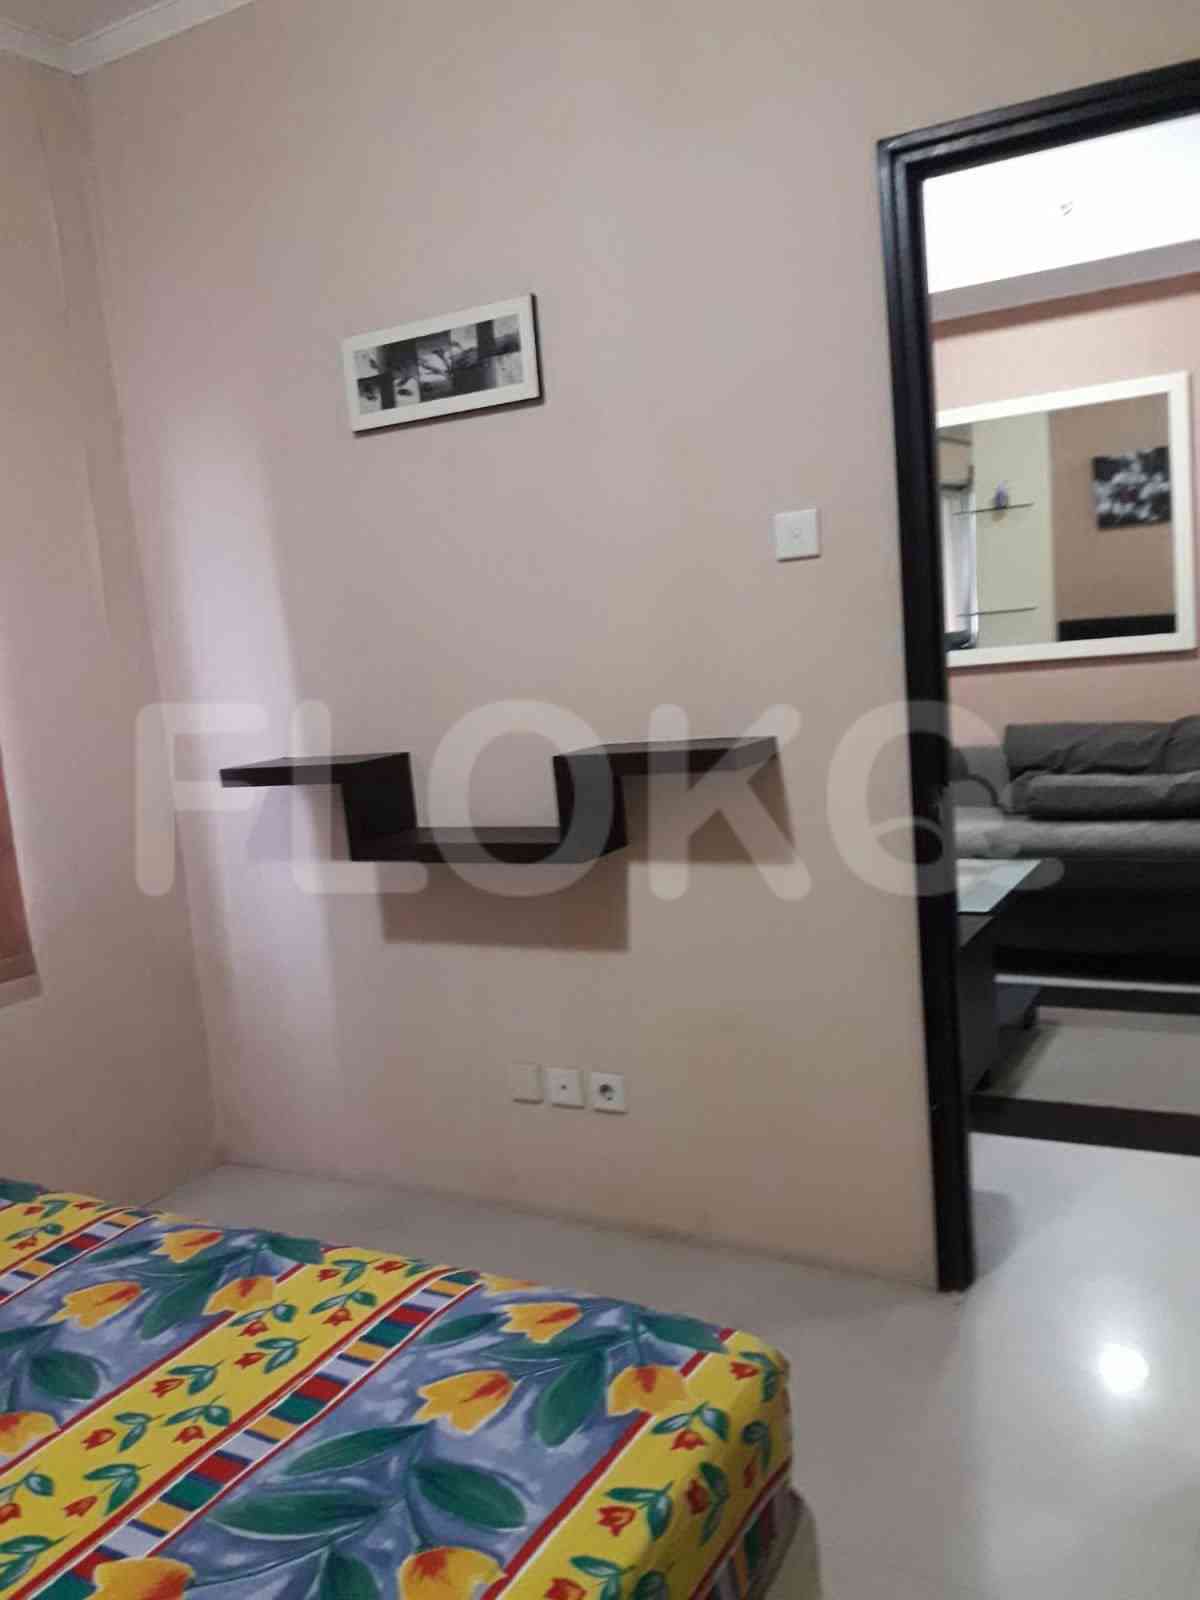 1 Bedroom on 23rd Floor for Rent in Sudirman Park Apartment - ftac77 4